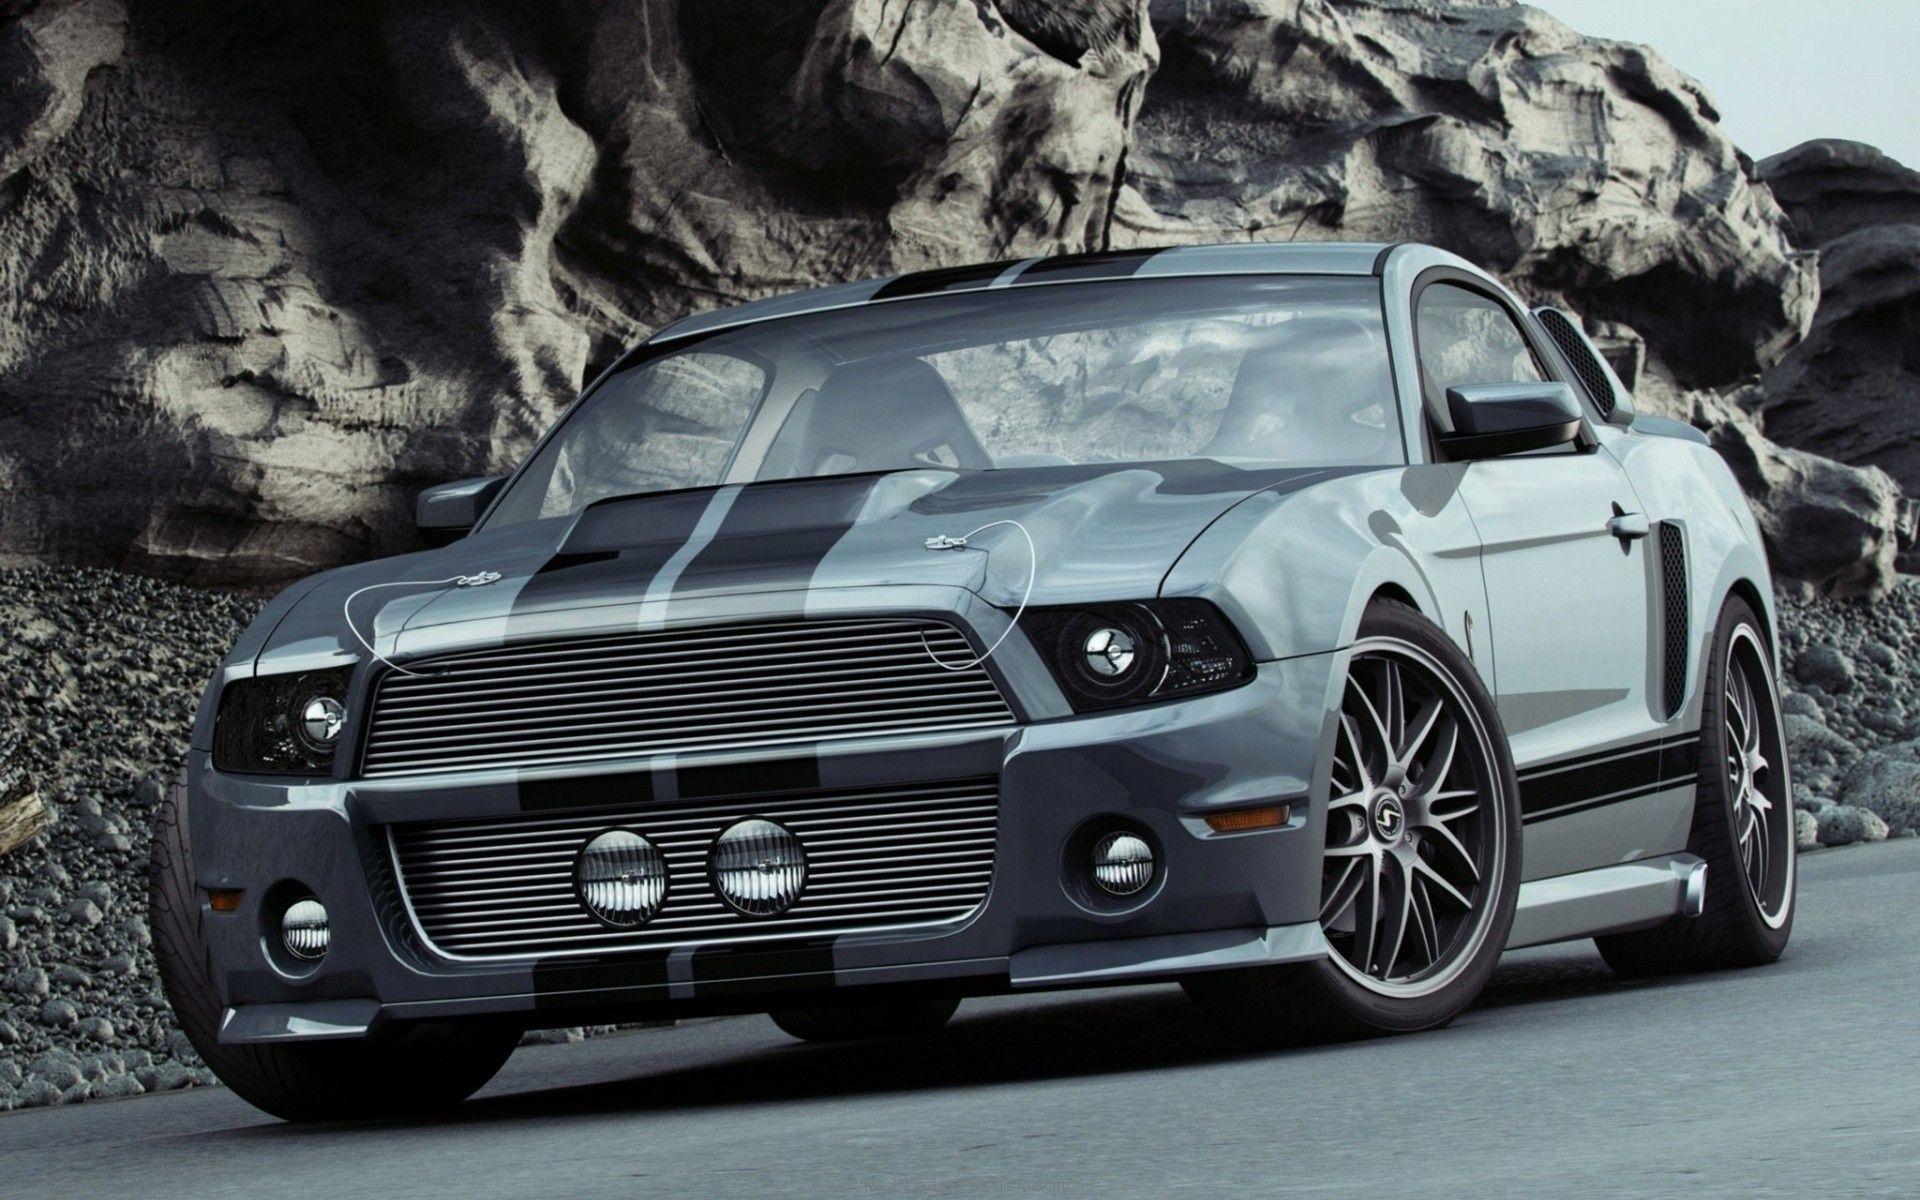 Ford mustang shelby eleanor